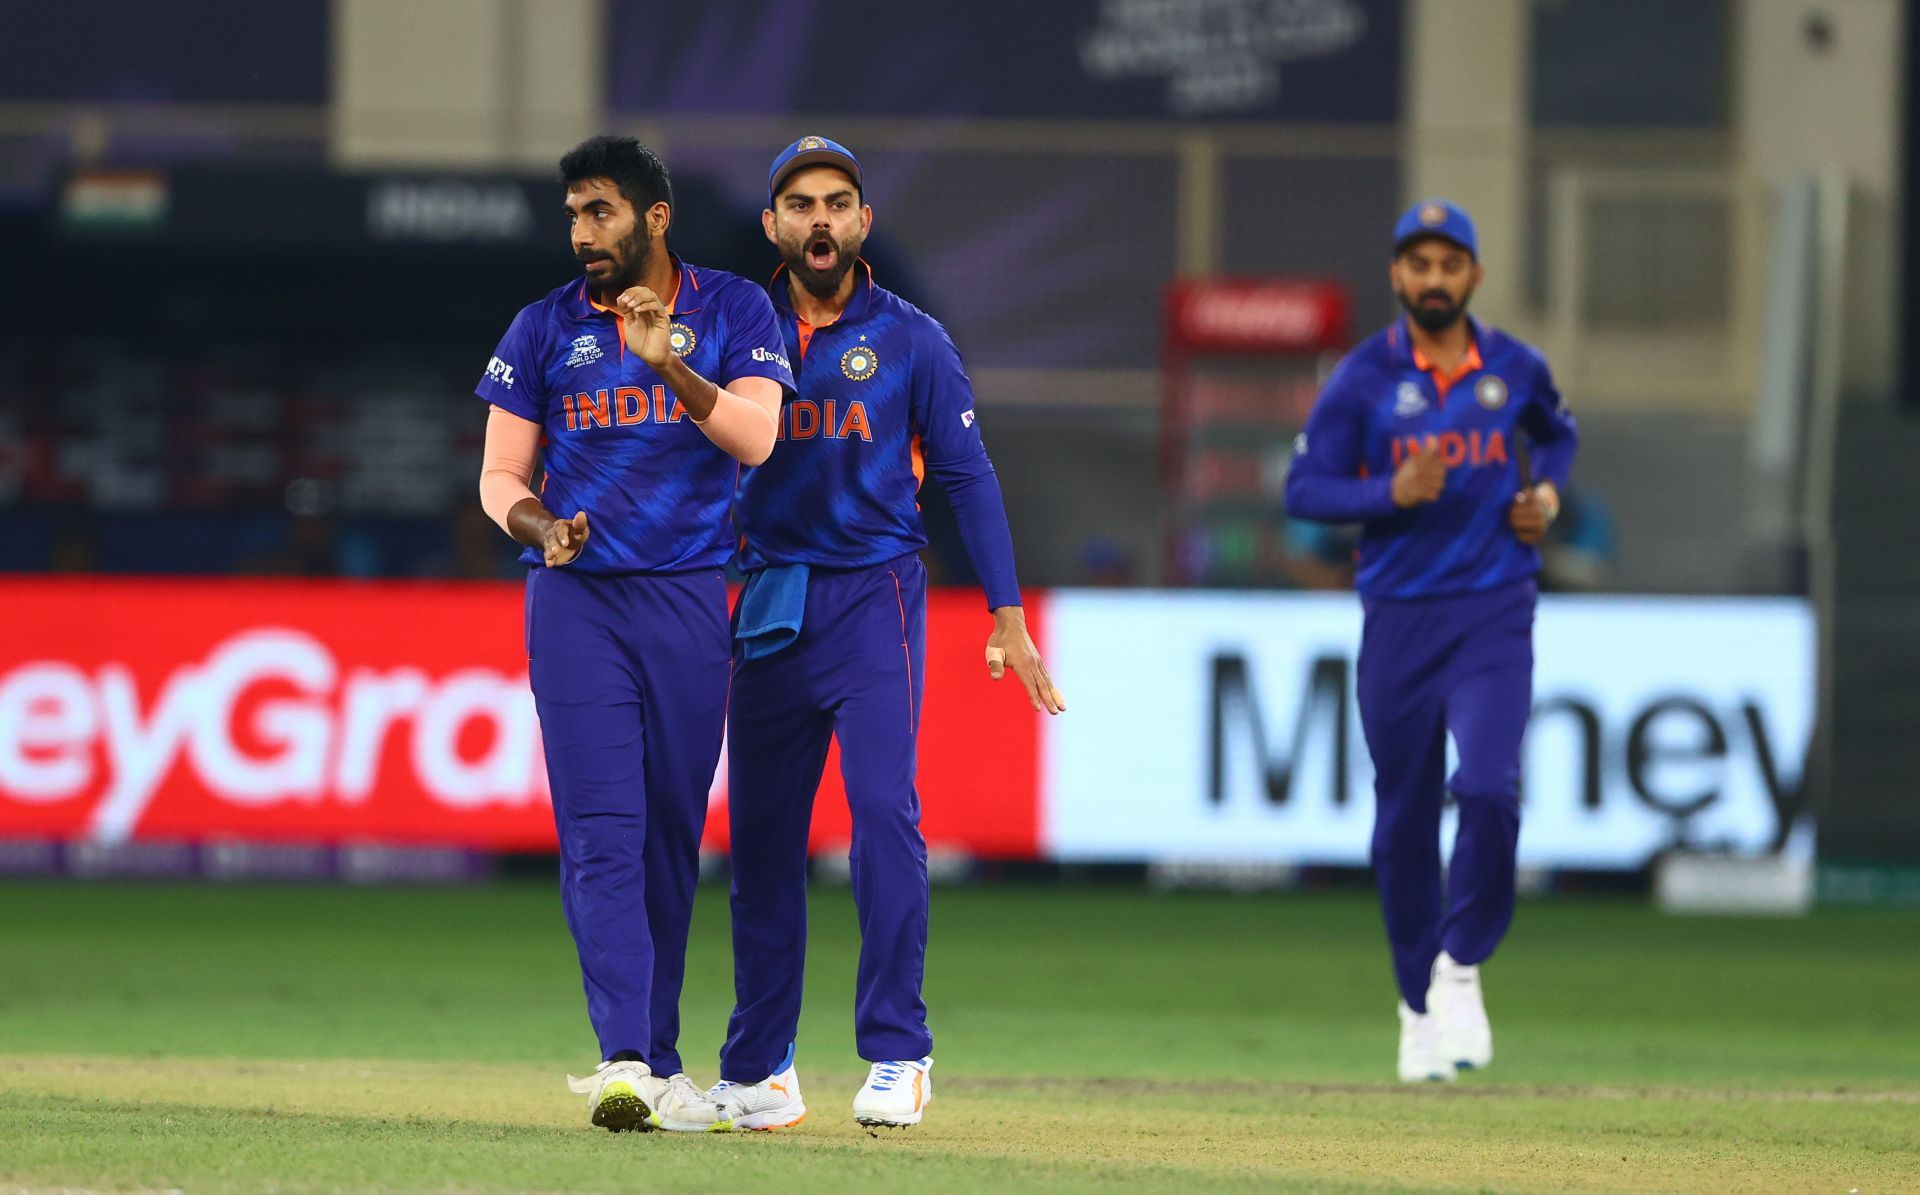 Jasprit Bumrah last played competitive cricket at the T20 World Cup